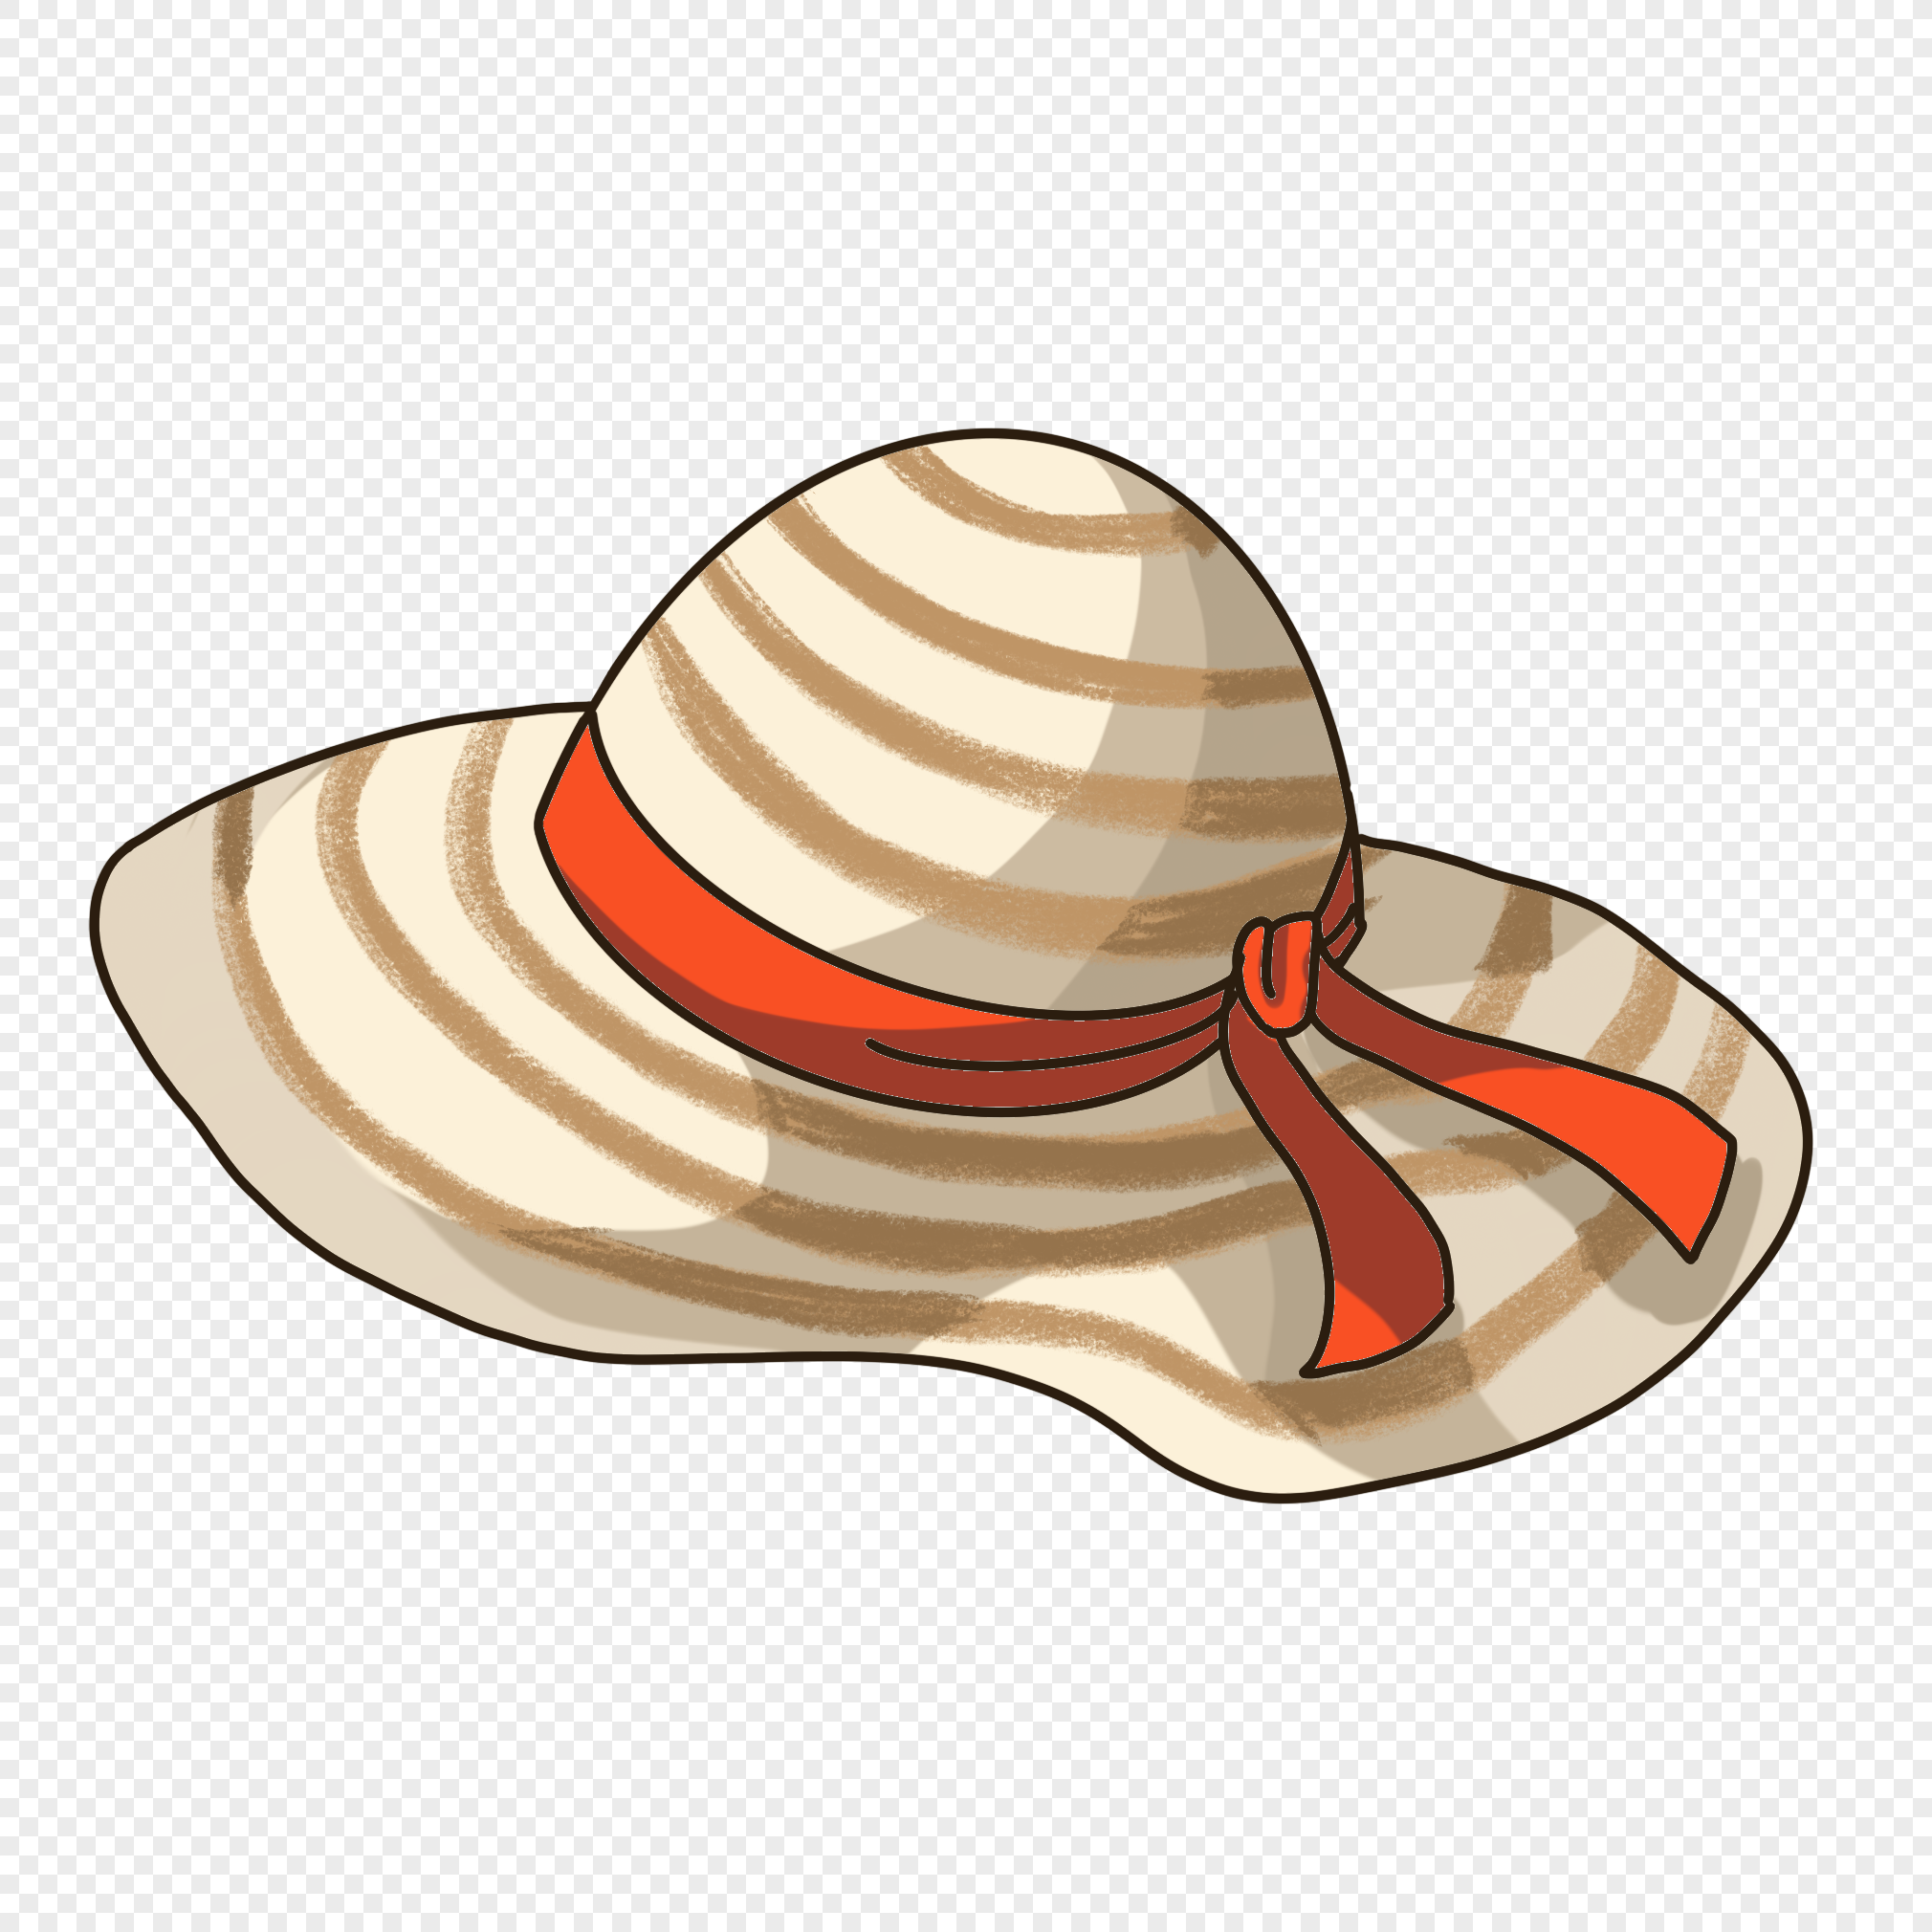 Cartoon White Sunhat PNG Picture And Clipart Image For Free Download ...